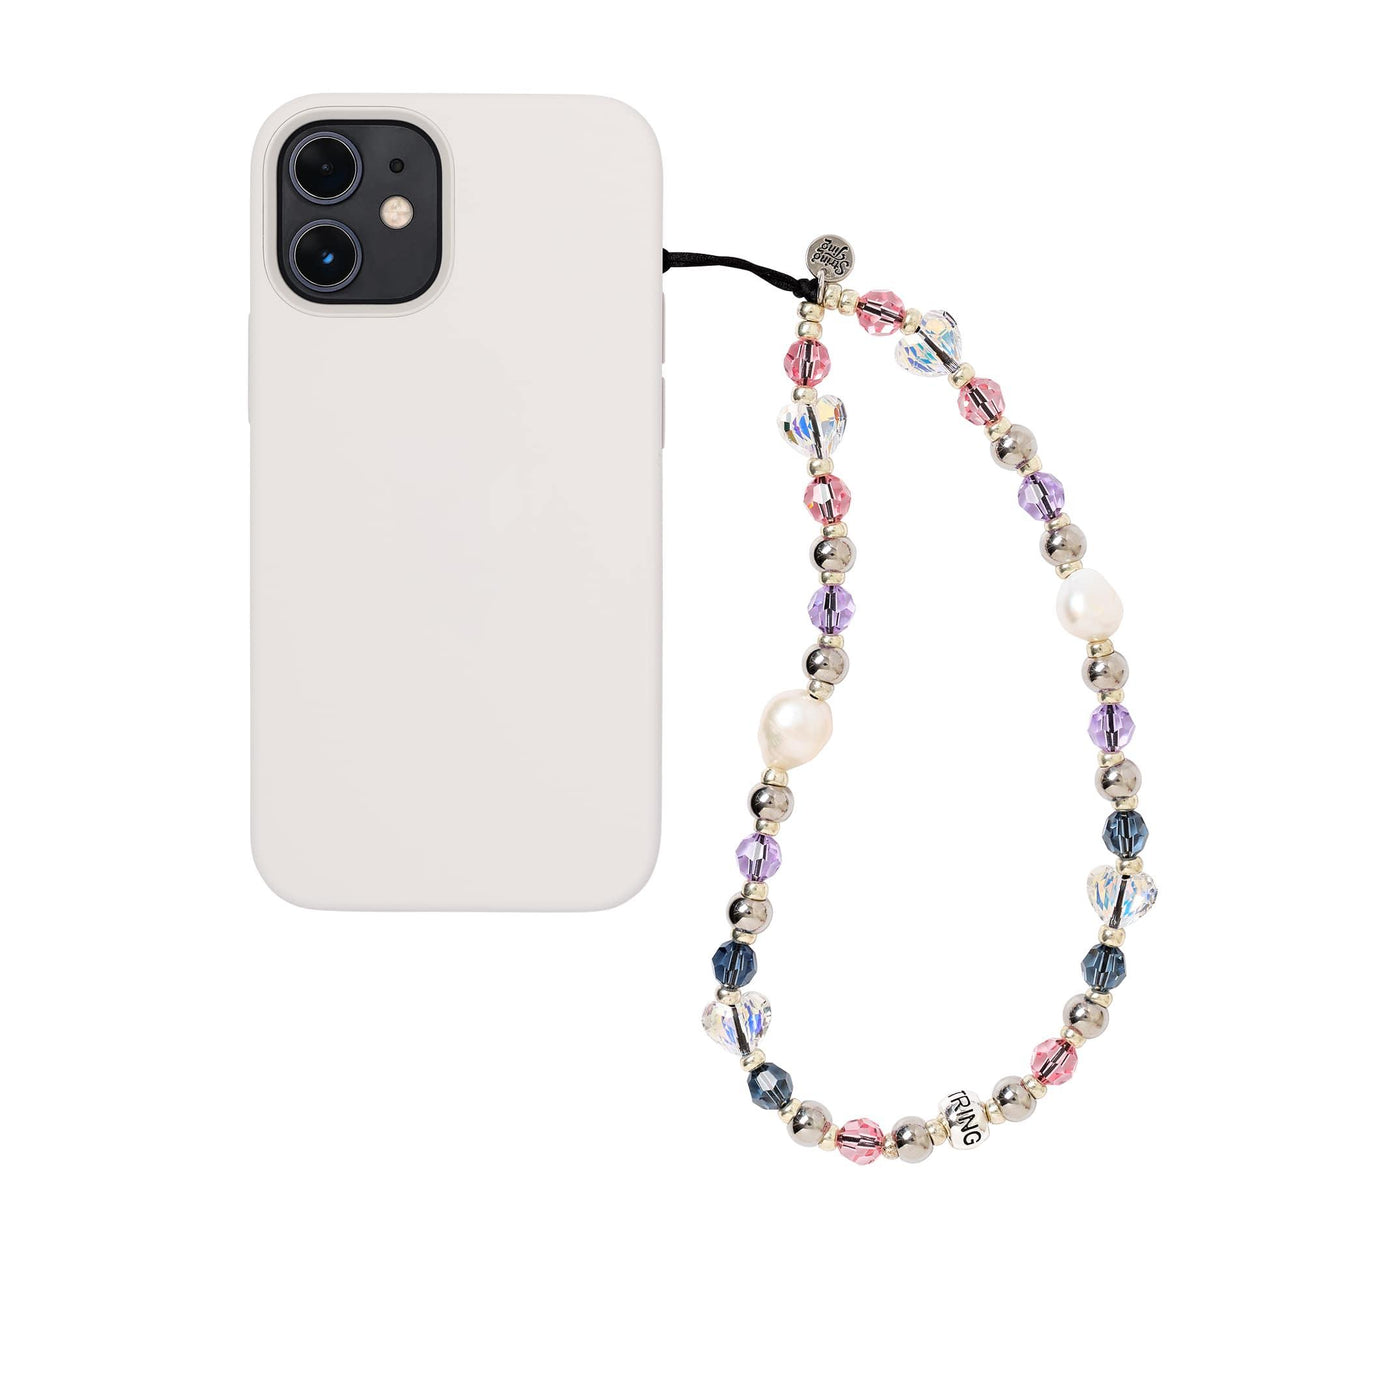 String Ting London Pearls Just Wanna Have - Ever After Phone Strap Wristlet